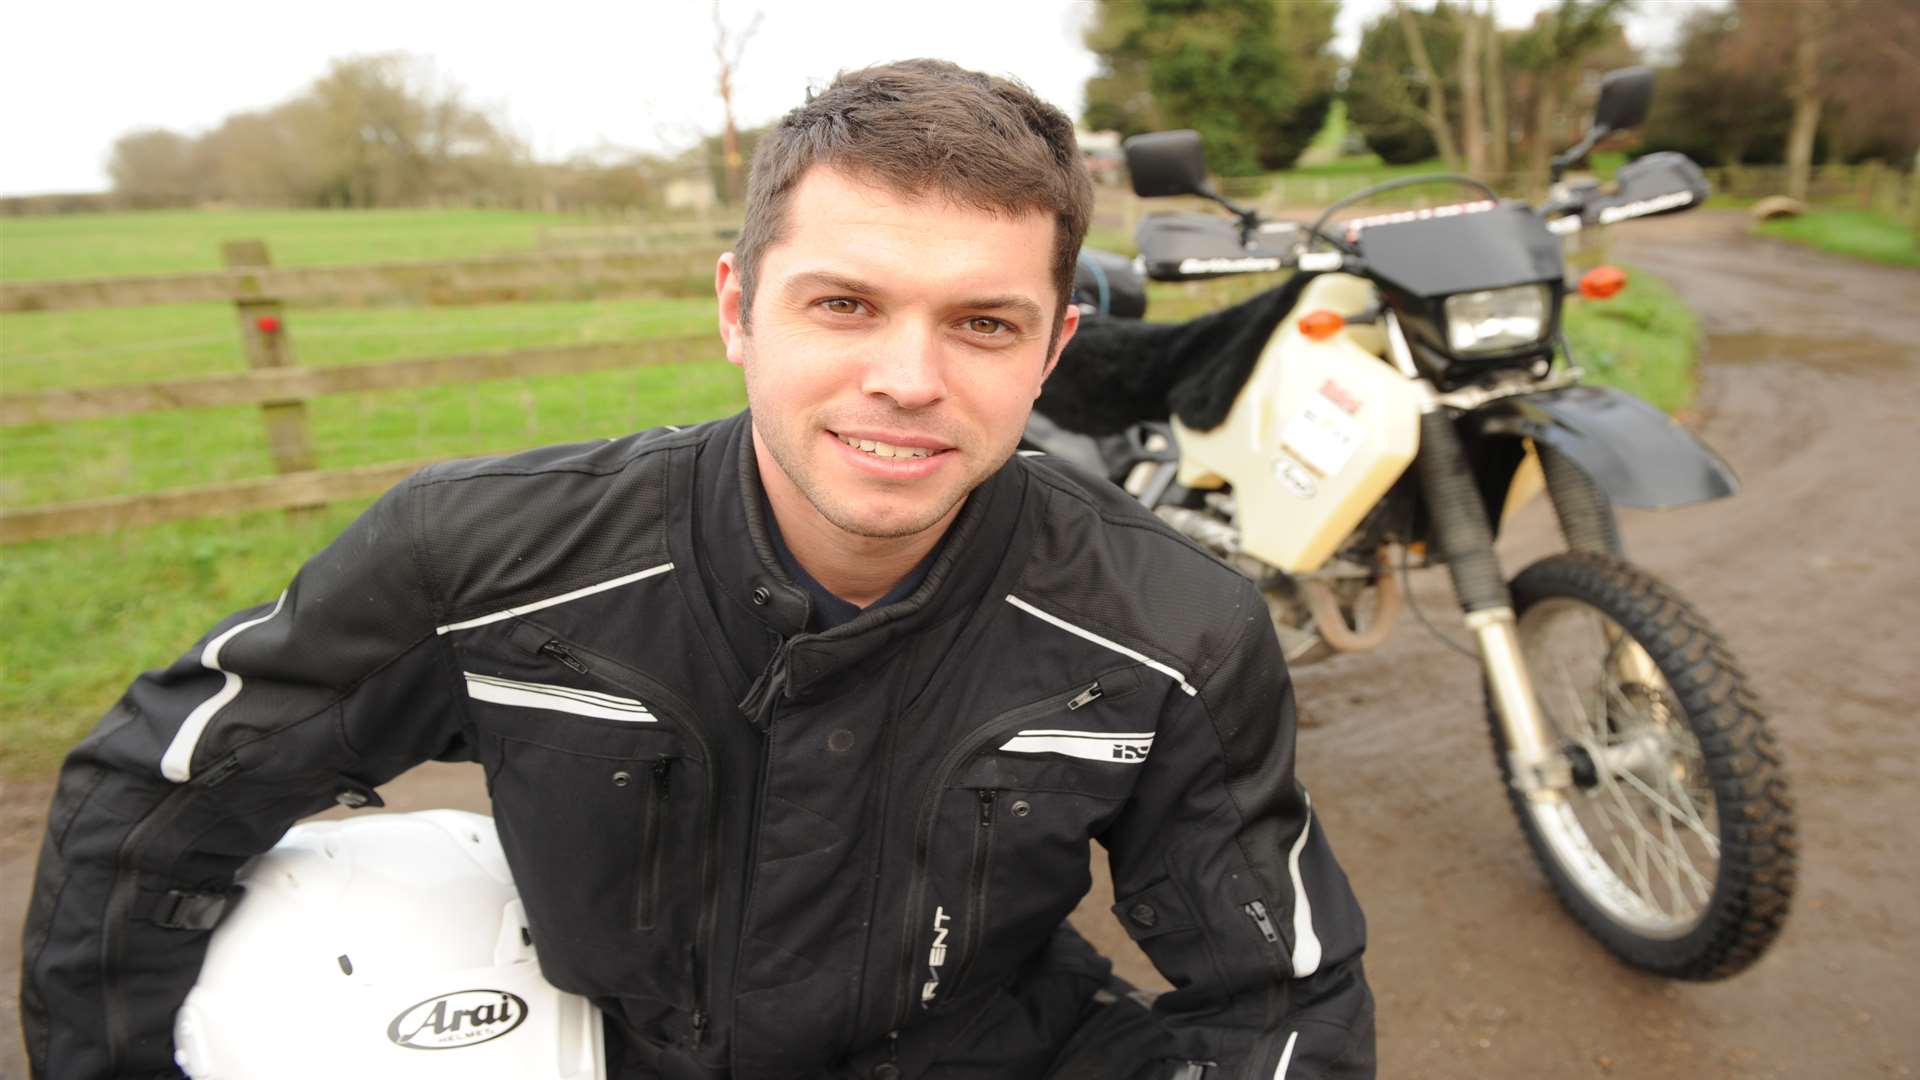 Aaron Mitchell is going round the world on his motorbike